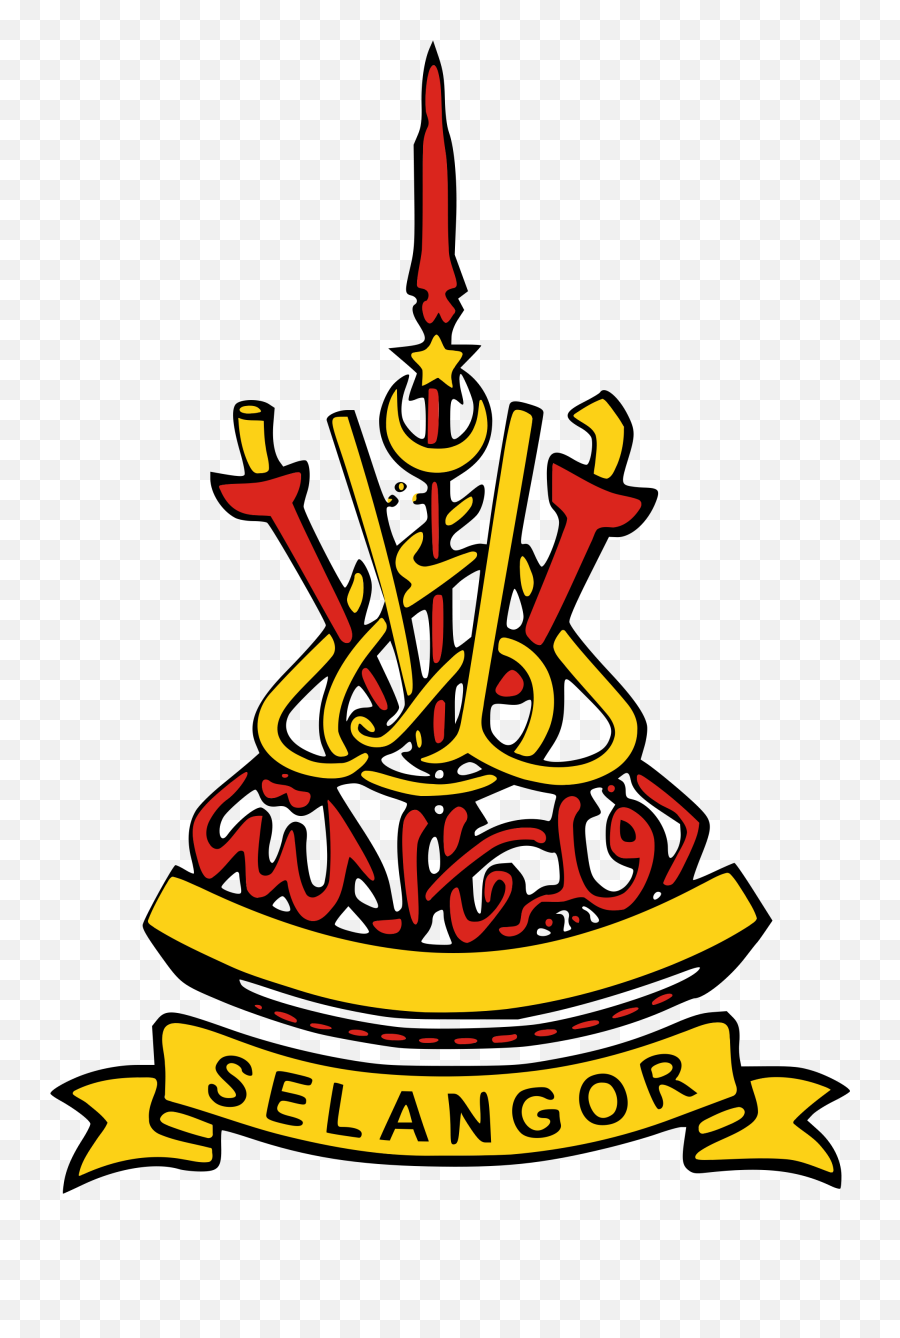 Selangor State Coat Of Arms - Selangor Coat Of Arms Emoji,Can I Guess A Sports Team By An Emoji